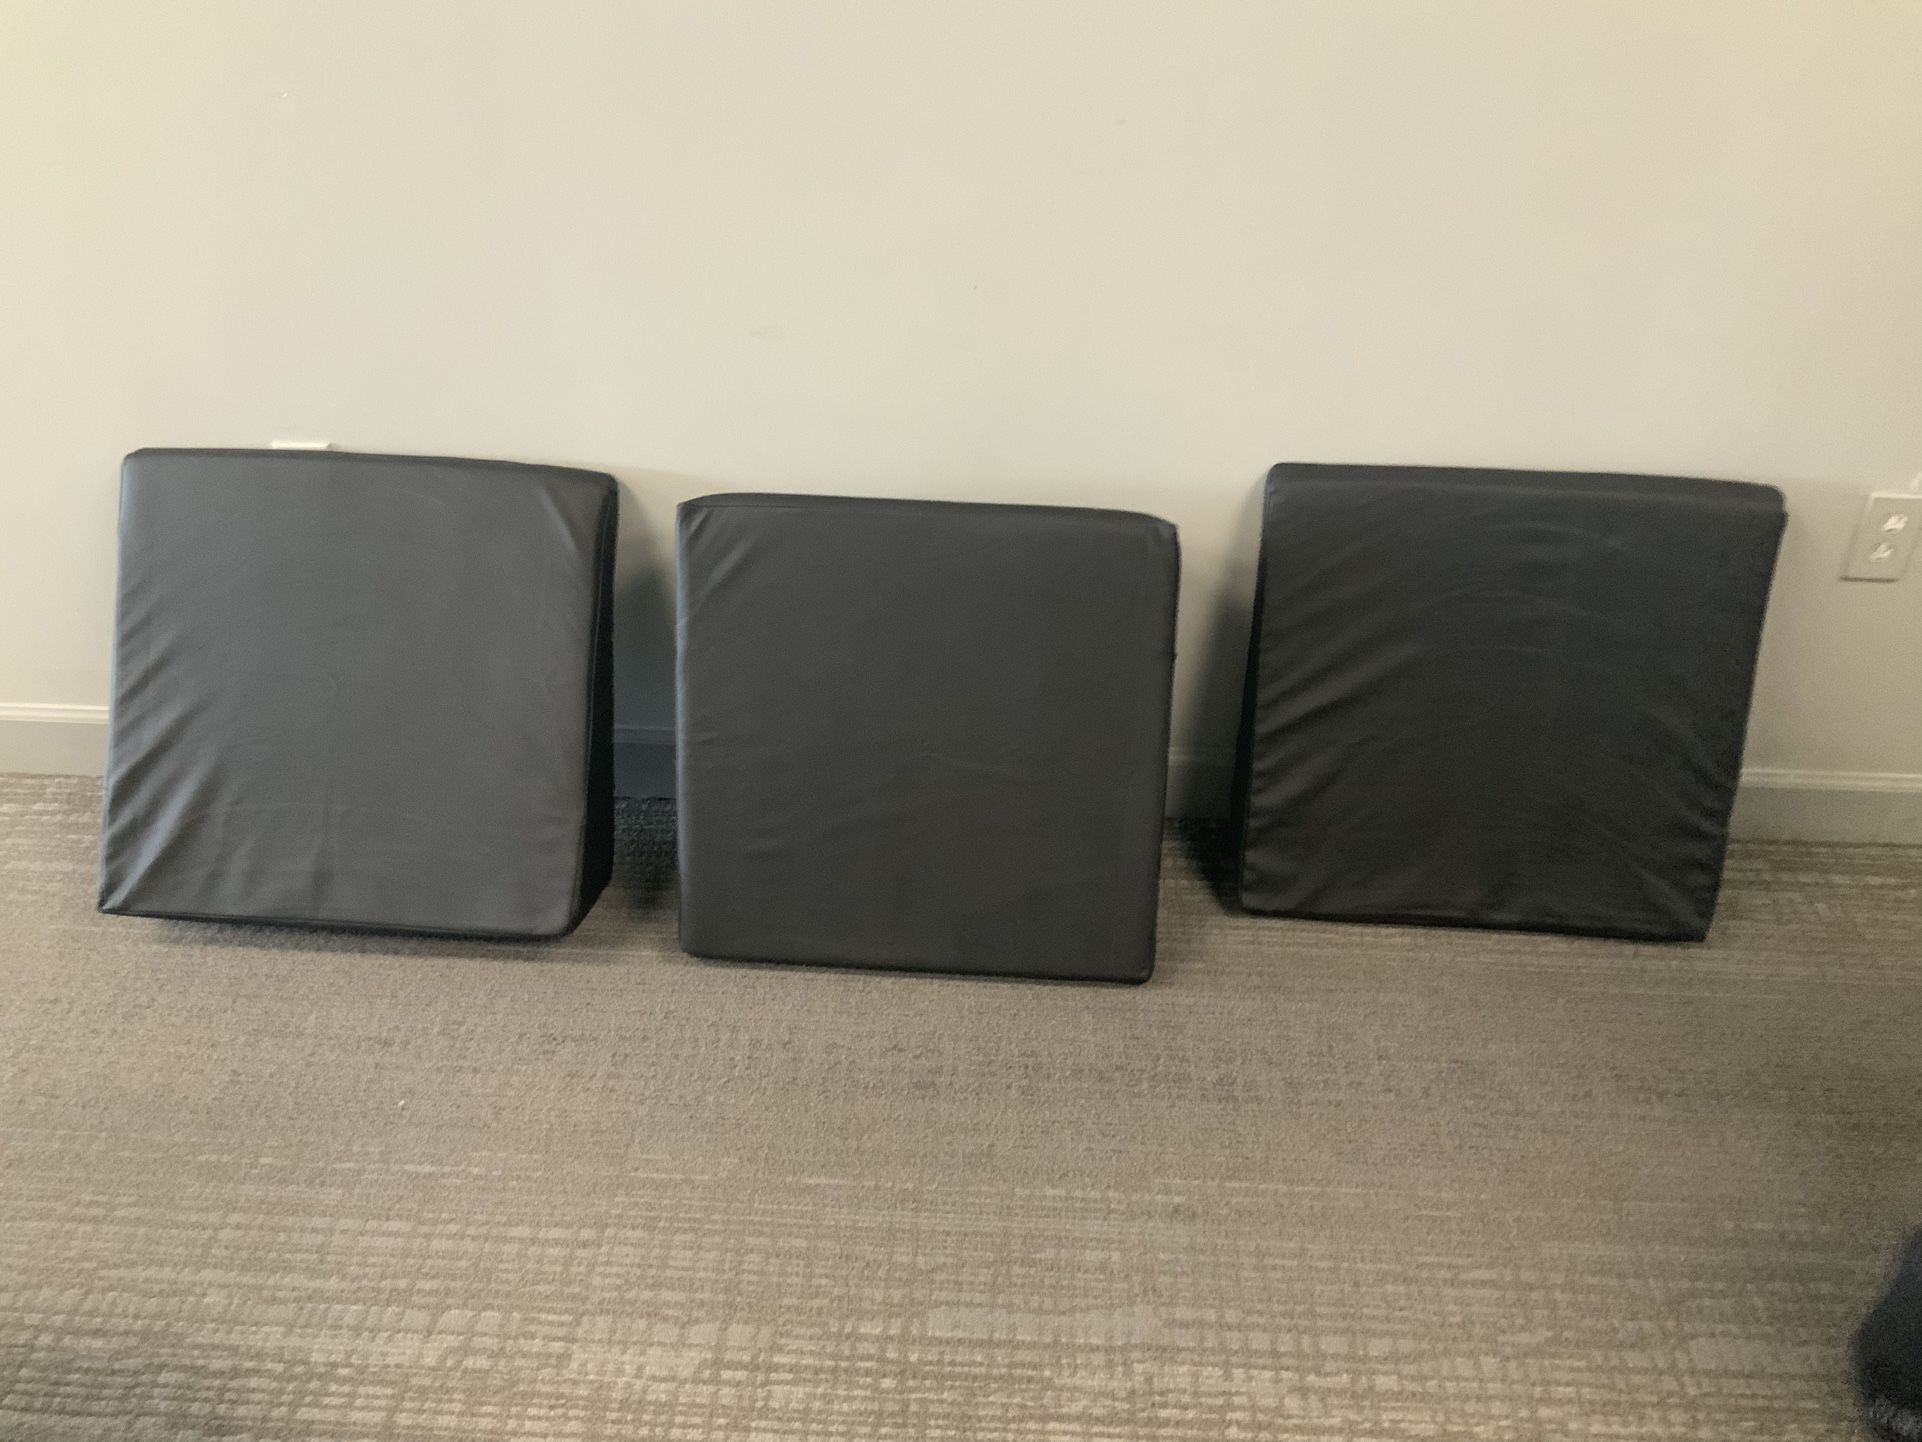 WEDGE PILLOWS. 3 For $100   Or 1 For $40!